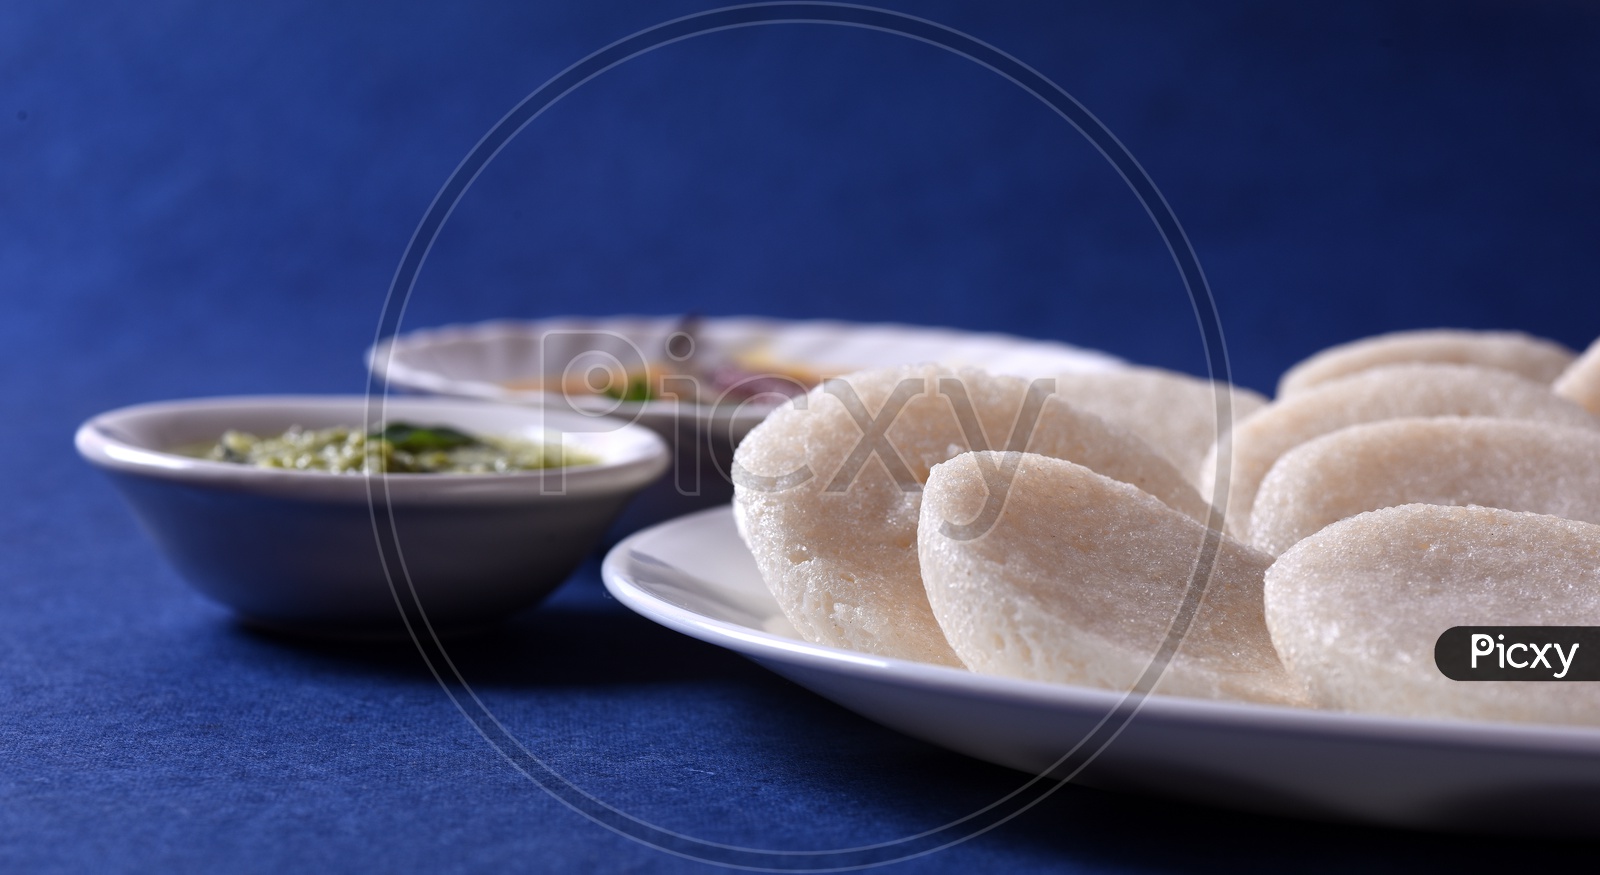 Idli with Sambar and coconut chutney on blue background, Indian Dish : south Indian favourite food rava idli or semolina idly or rava idly, served with sambar and green chutney.